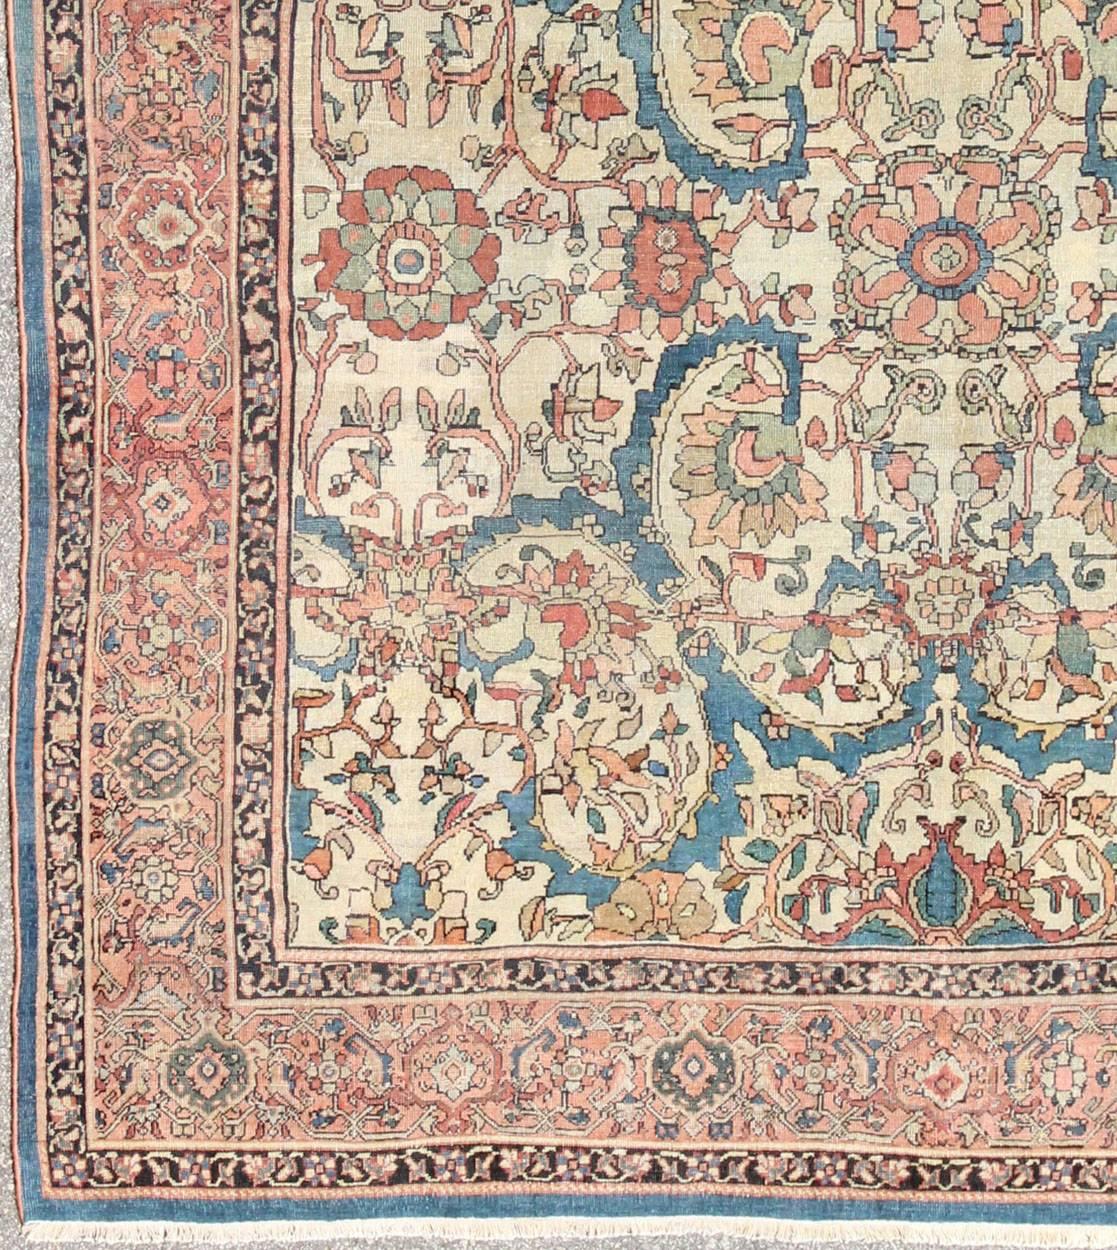 Antique Persian Sultanabad Rug in Ivory Background, Blue, Salmon & Multi Colors.
This antique Sultanabad rug features a large-scale design comprised of palmettes and stylized flowers. The gorgeous piece is characterized by a rare color combination: